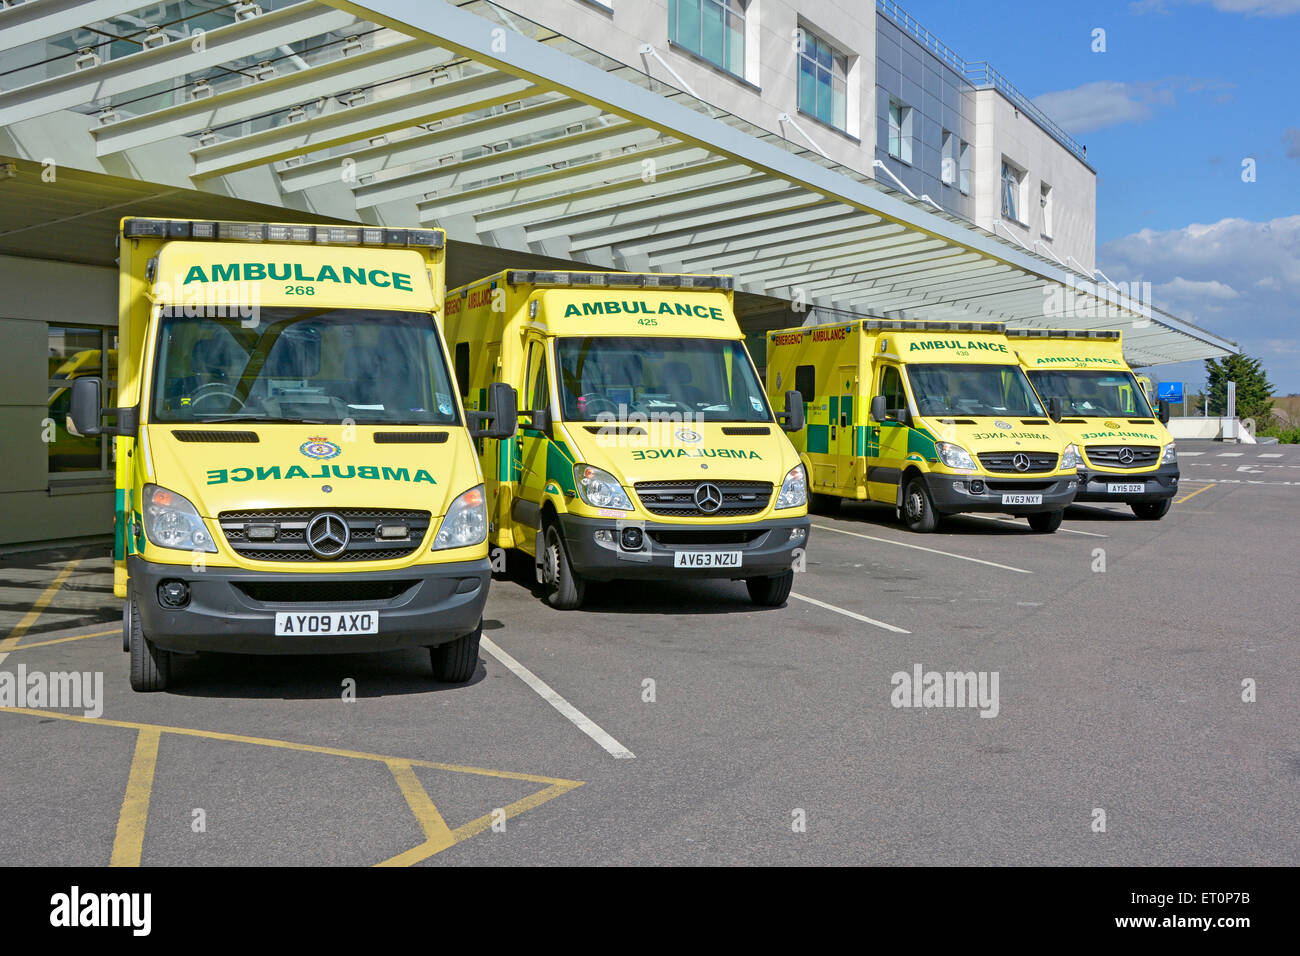 East Of England ambulance service NHS emergency SOS 999 ambulances parked at A&E Broomfield hospital accident & emergency department Essex, England UK Stock Photo